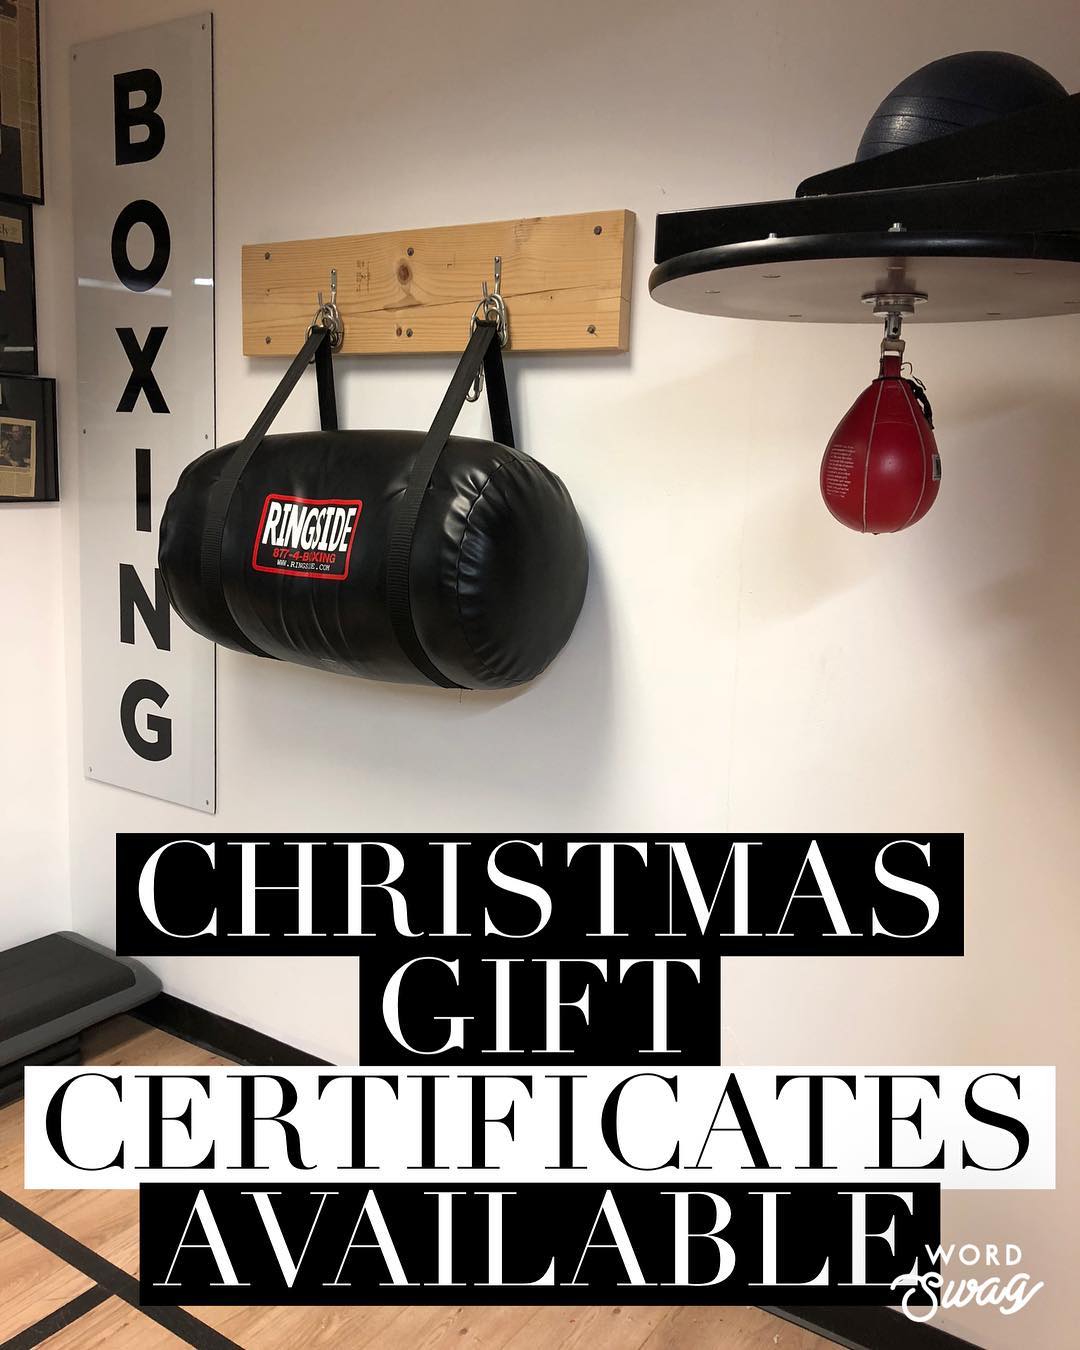 Still time left to pick up that last minute gift . Text or call us at (781)727-9503 for more information. . #boxing #fitness #christmas #giftcard #present #holiday #workout #exercise #cardio #conditioning #weightloss #fight #fit #Boston #Dedham #legacyplace #boxingtraining #boxingtrainer